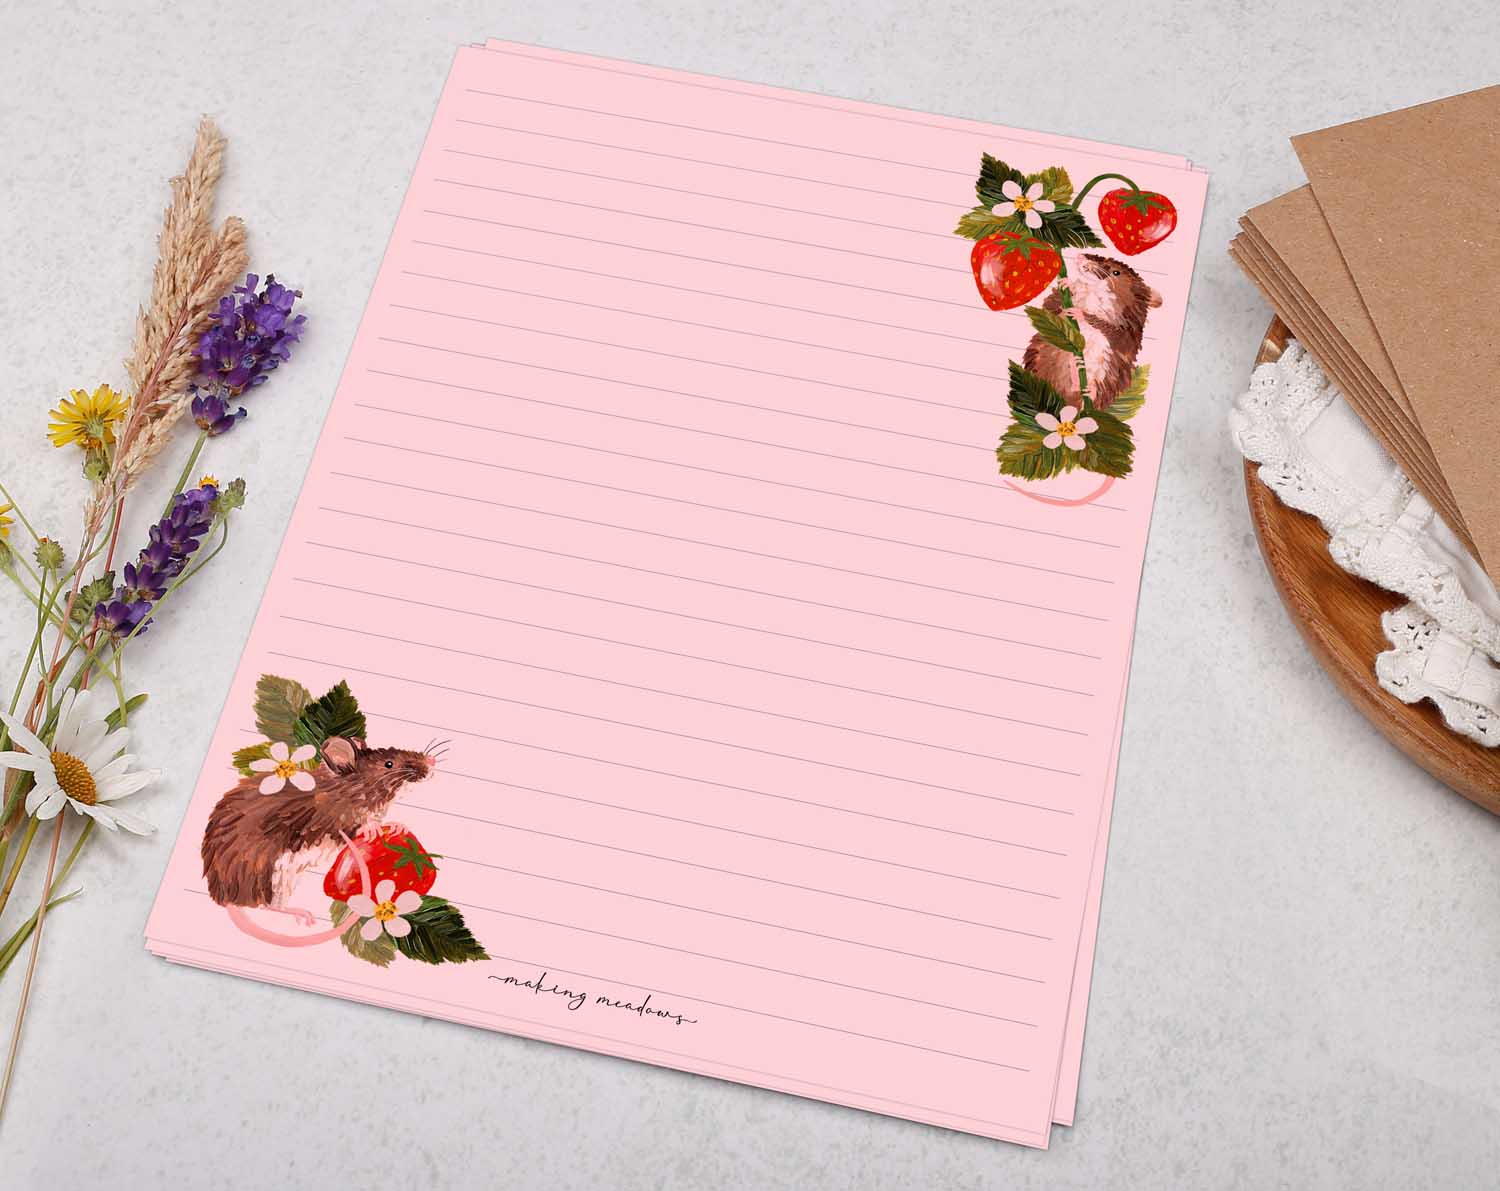 Pink A5 letter writing paper sheets with field mice and strawberry design.